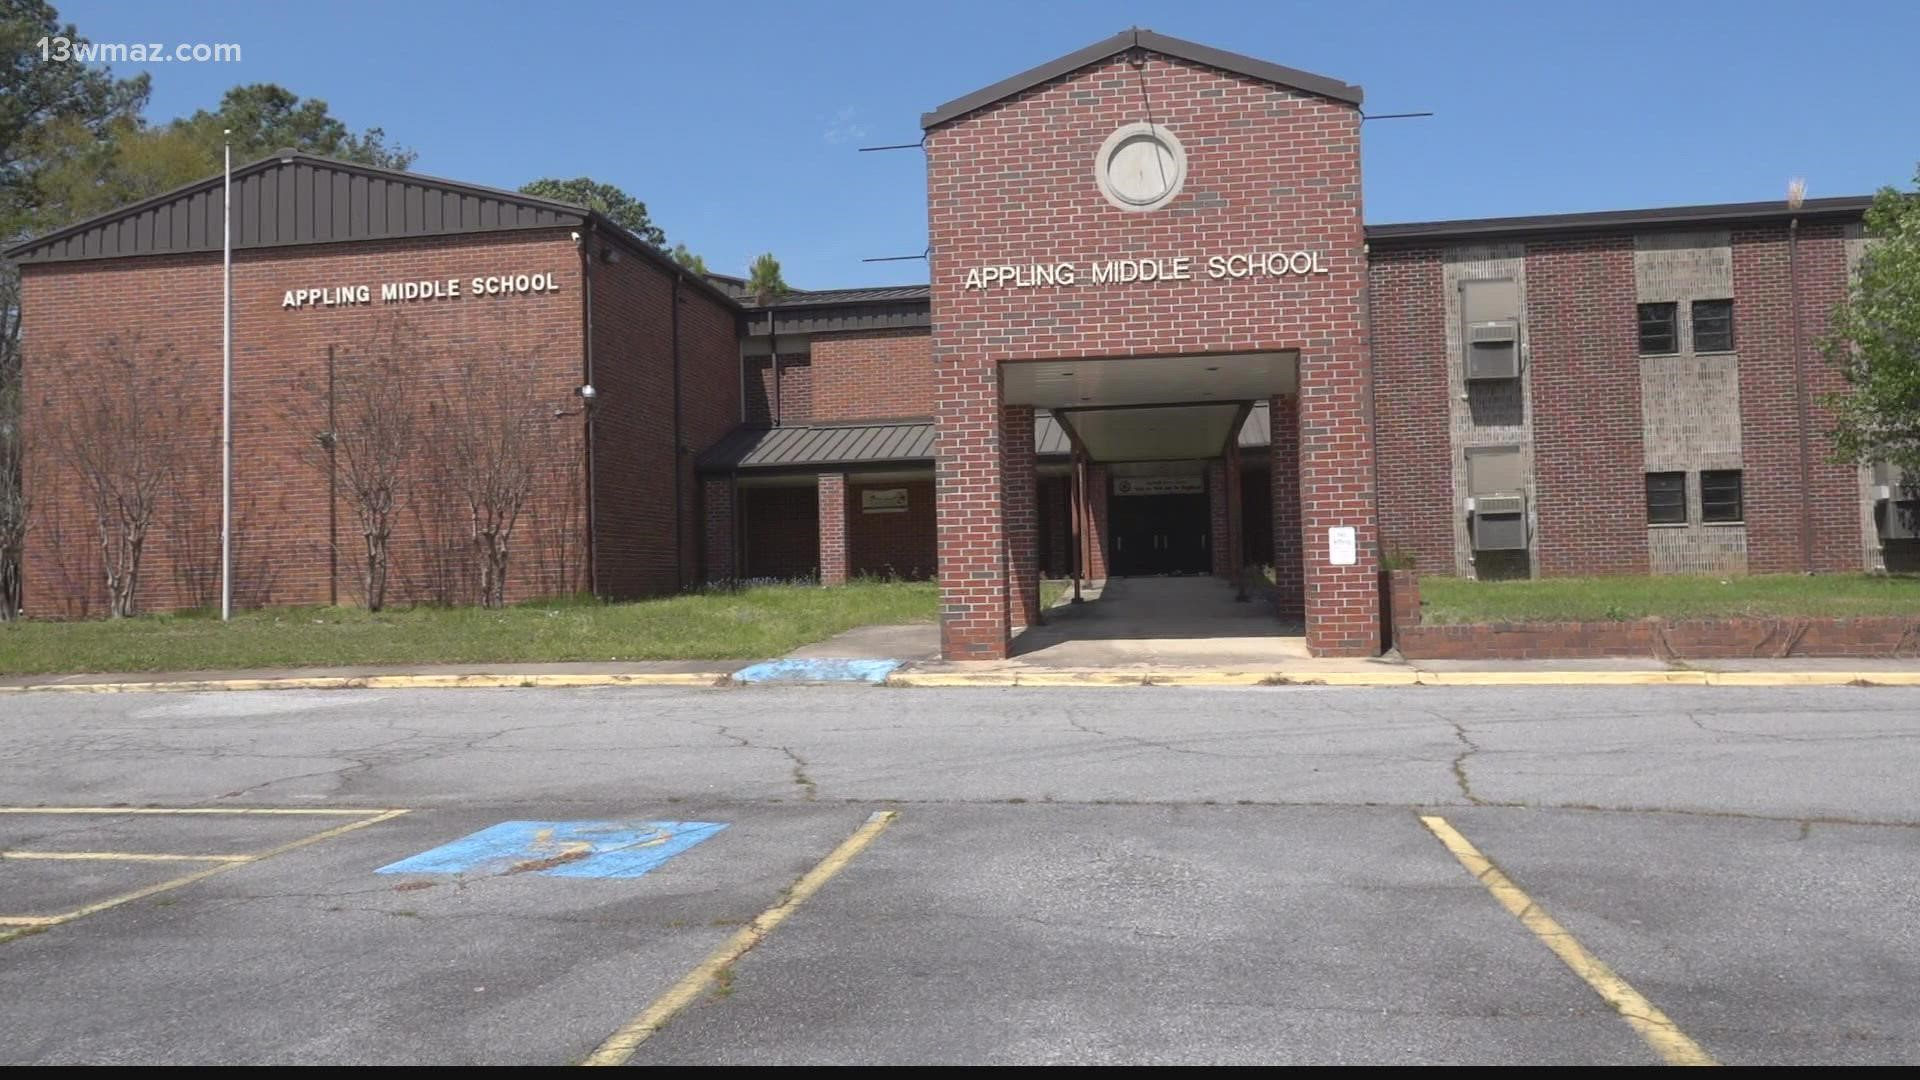 east-macon-residents-compromise-to-save-appling-middle-school-13wmaz